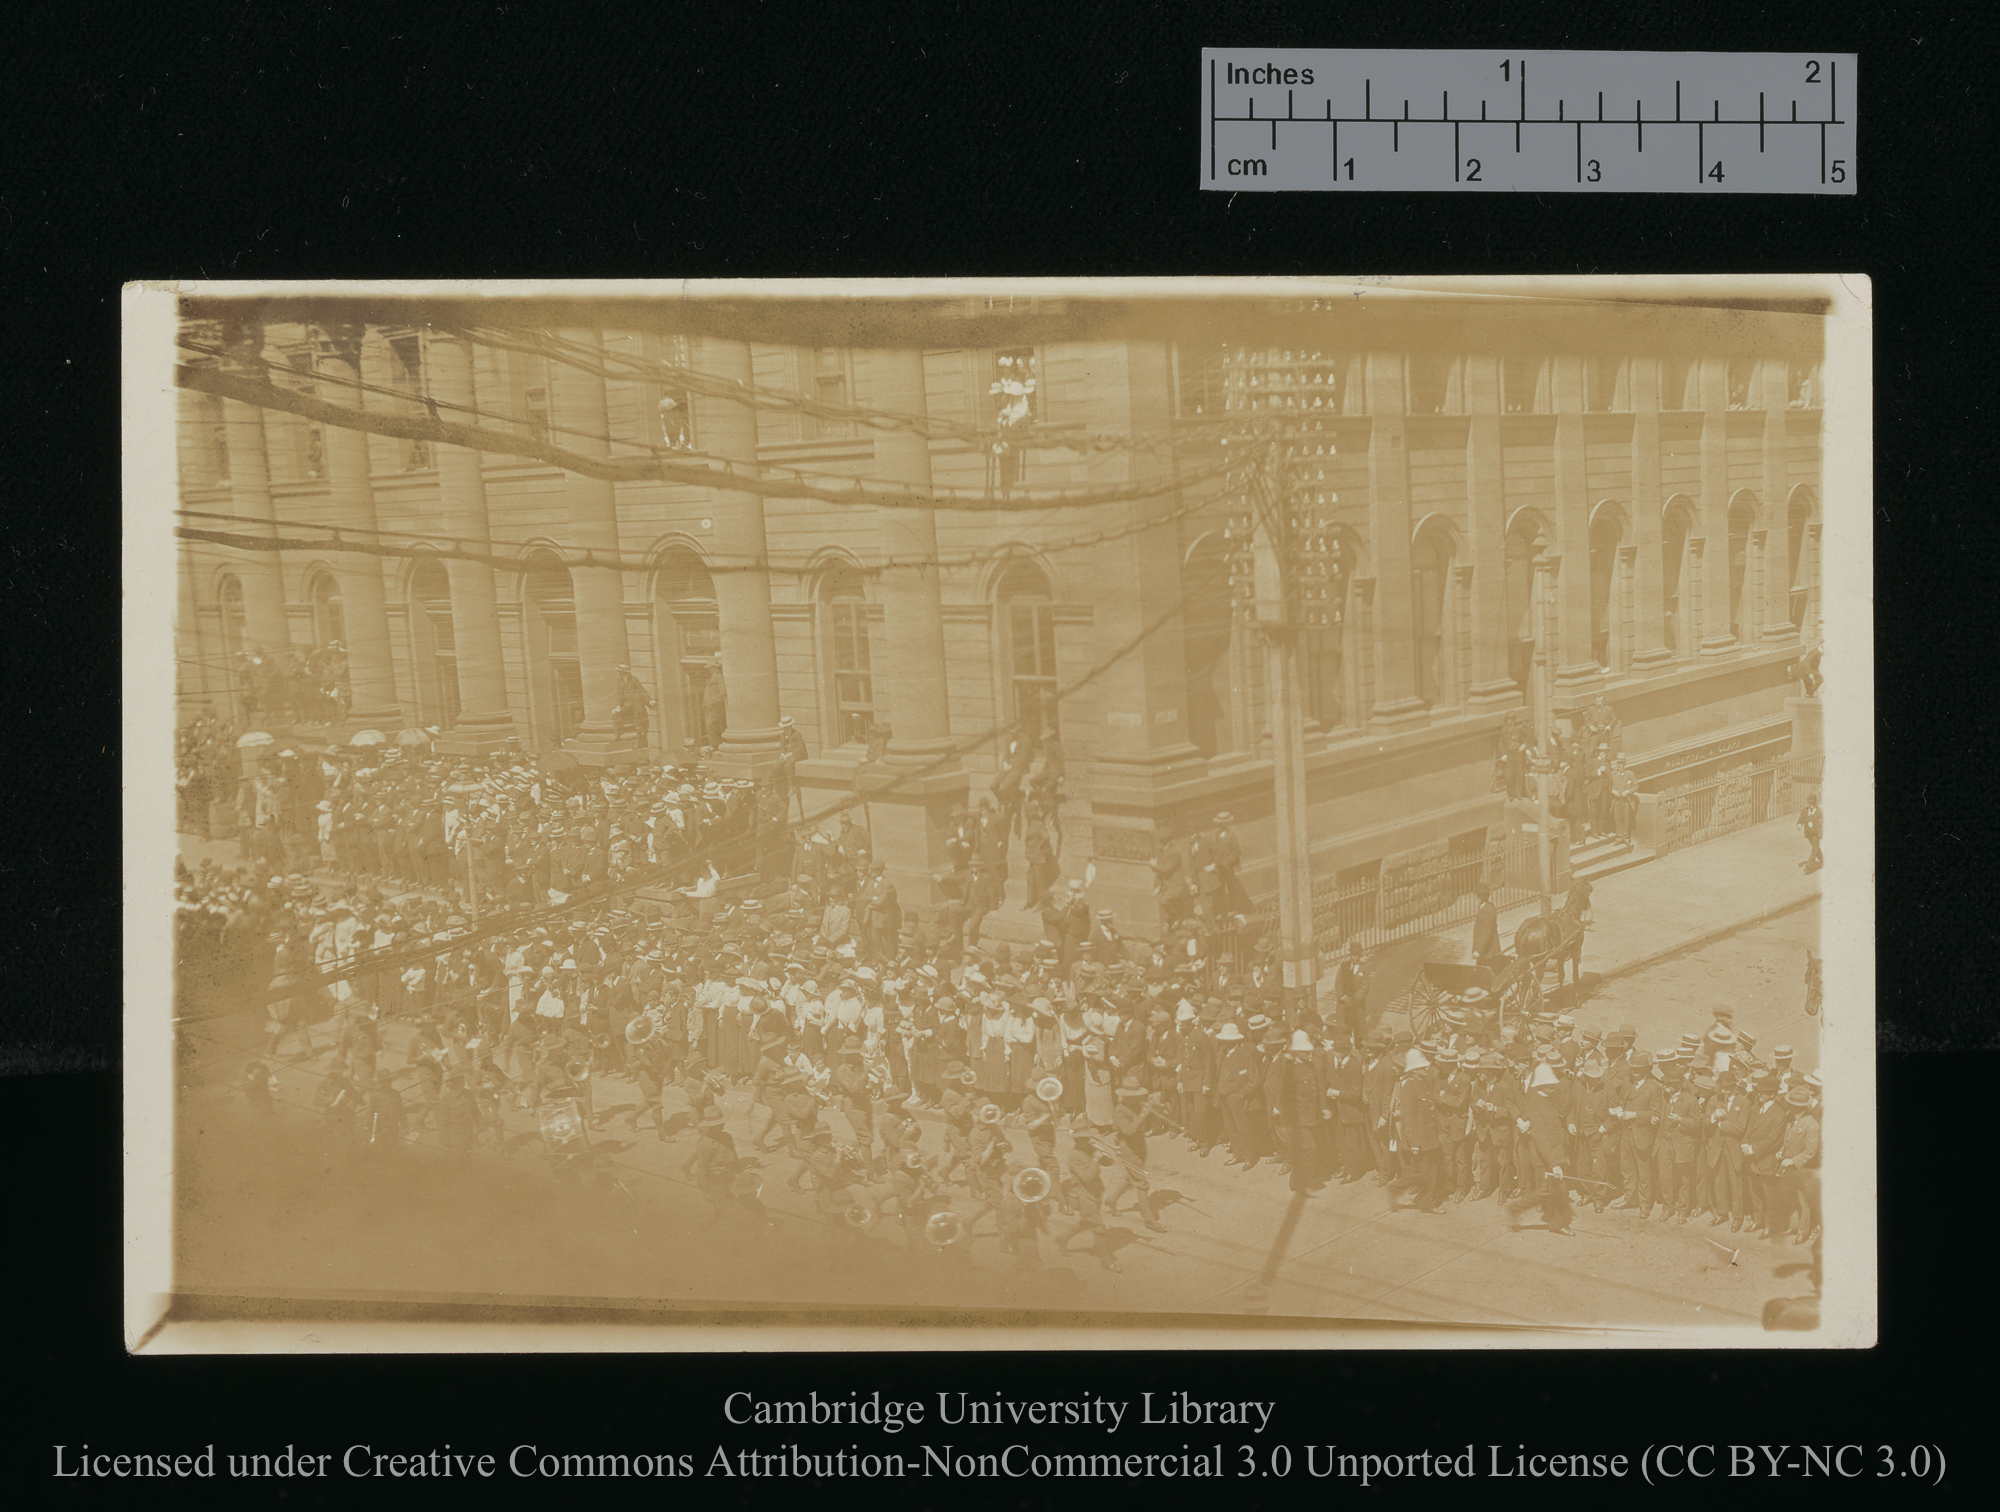 The crowd outside Houlder Brothers&#39; Office in Sydney, the morning after a request for recruits to accompany horses for S. Africa&#39;, 1899 - 1900